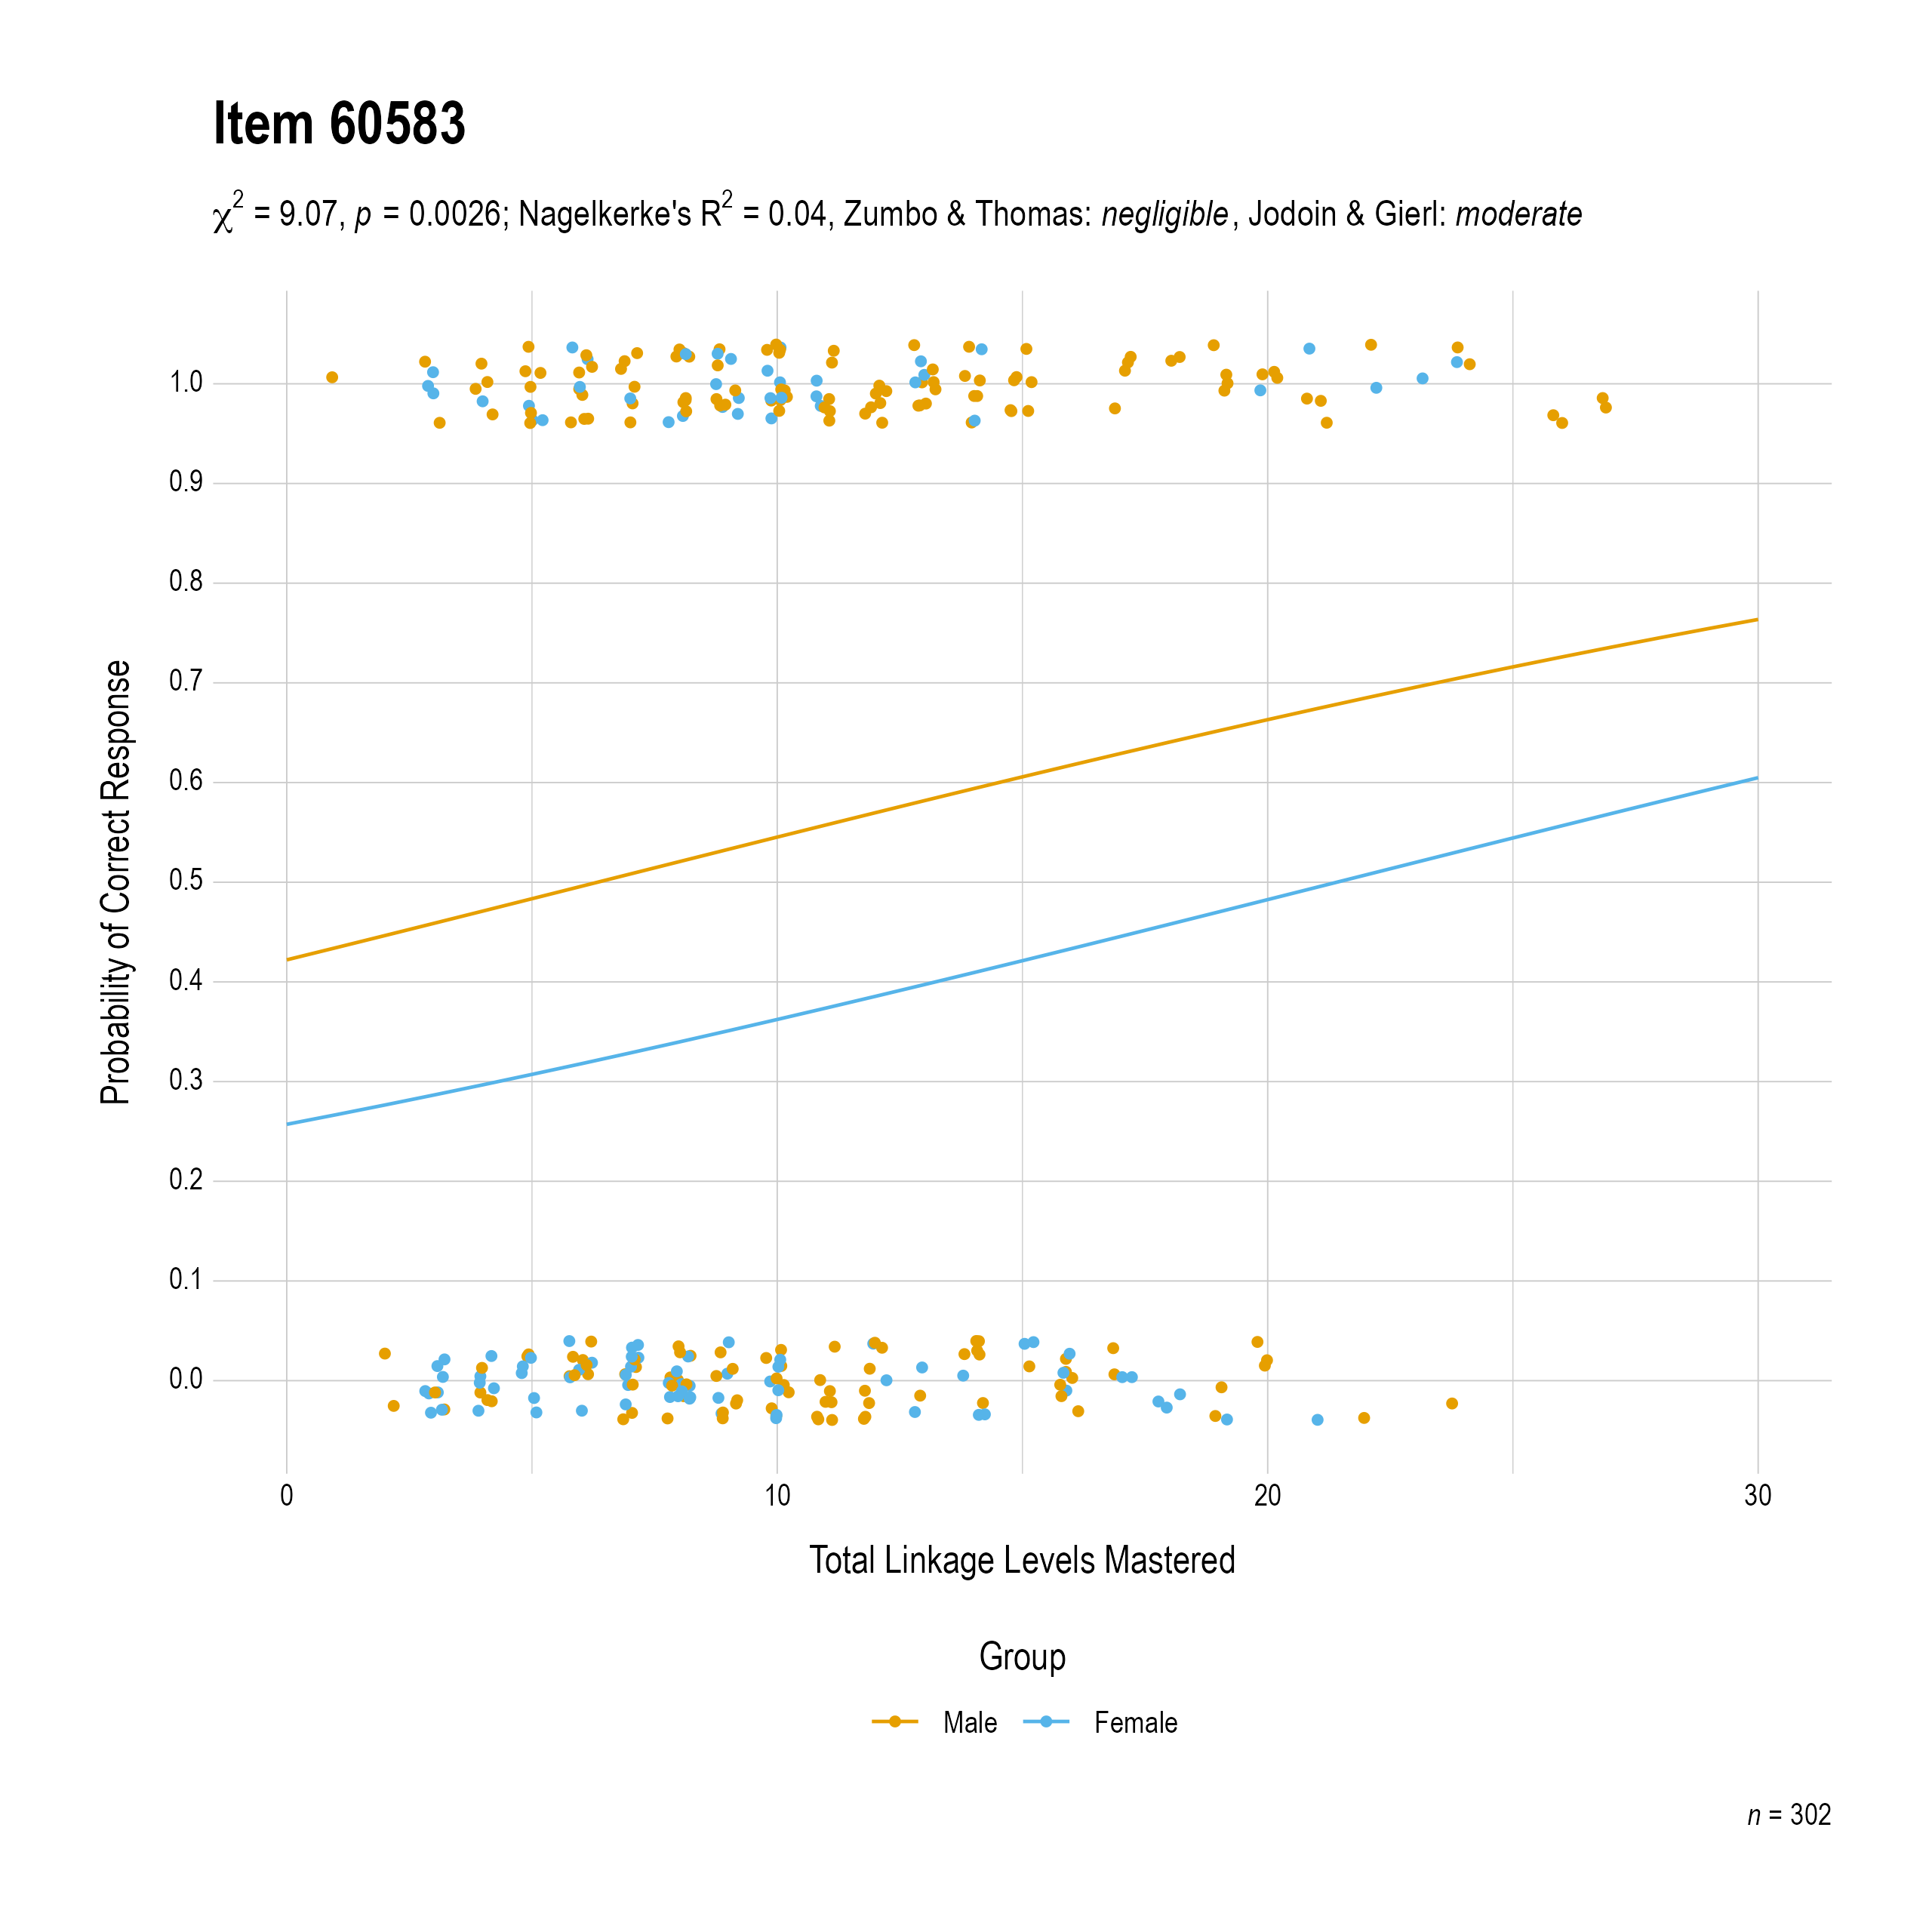 The plot of the uniform gender differential item function evidence for Mathematics item 60583. The figure contains points shaded by group. The figure also contains a logistic regression curve for each group. The total linkage levels mastered in is on the x-axis, and the probability of a correct response is on the y-axis.